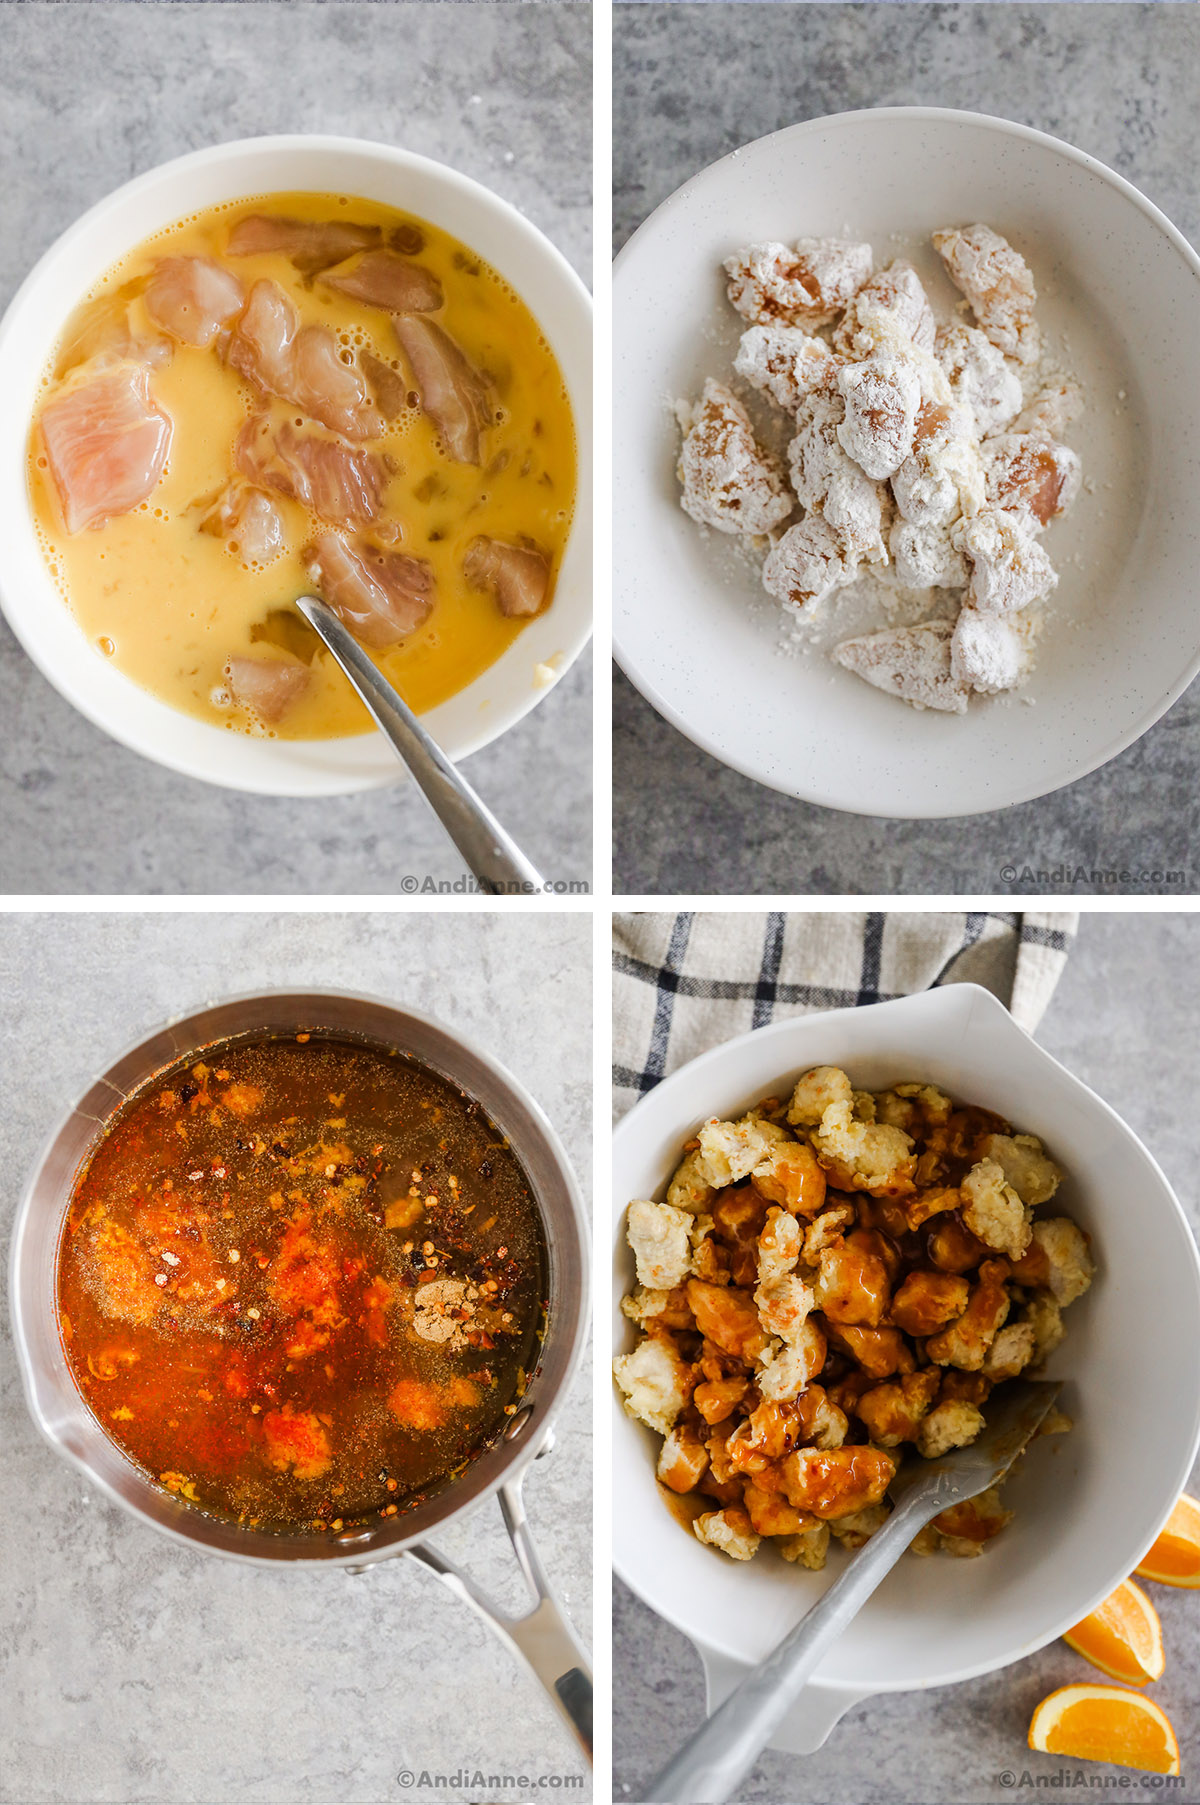 Four images showing steps to make recipe. First is raw chicken pieces with beaten eggs in a bowl. Second is raw chicken pieces tossed with flour mixture, third is various orange ingredients dumped in sauce pan. Fourth is cooked chicken pieces and sauce in a bowl with spatula.